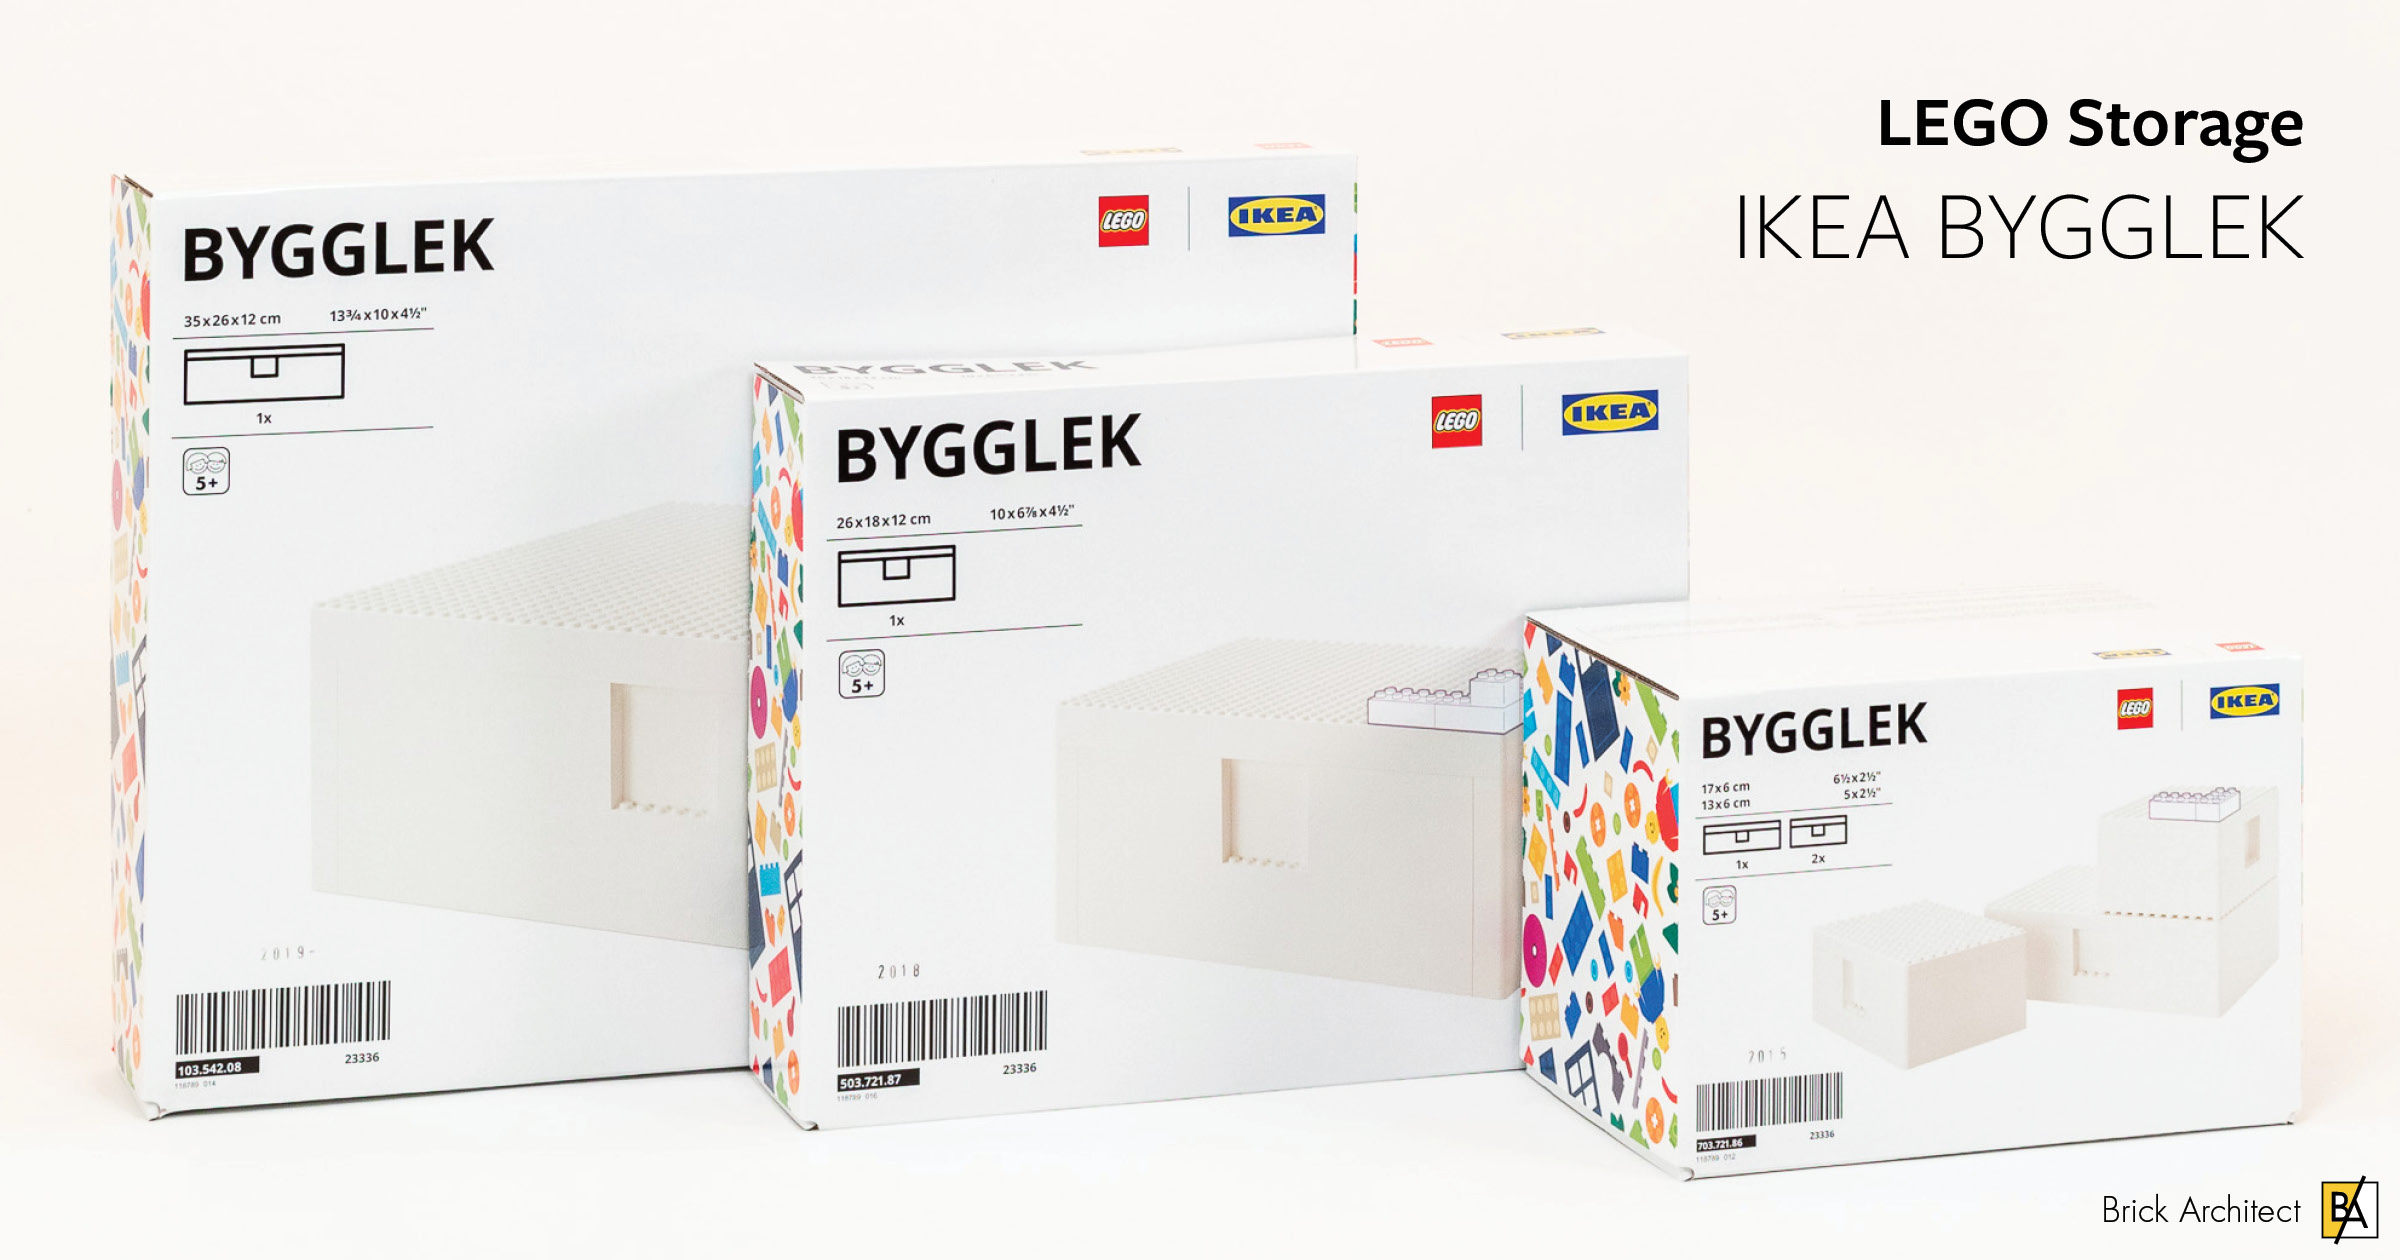 depositum desinficere reference Review: IKEA BYGGLEK - BRICK ARCHITECT